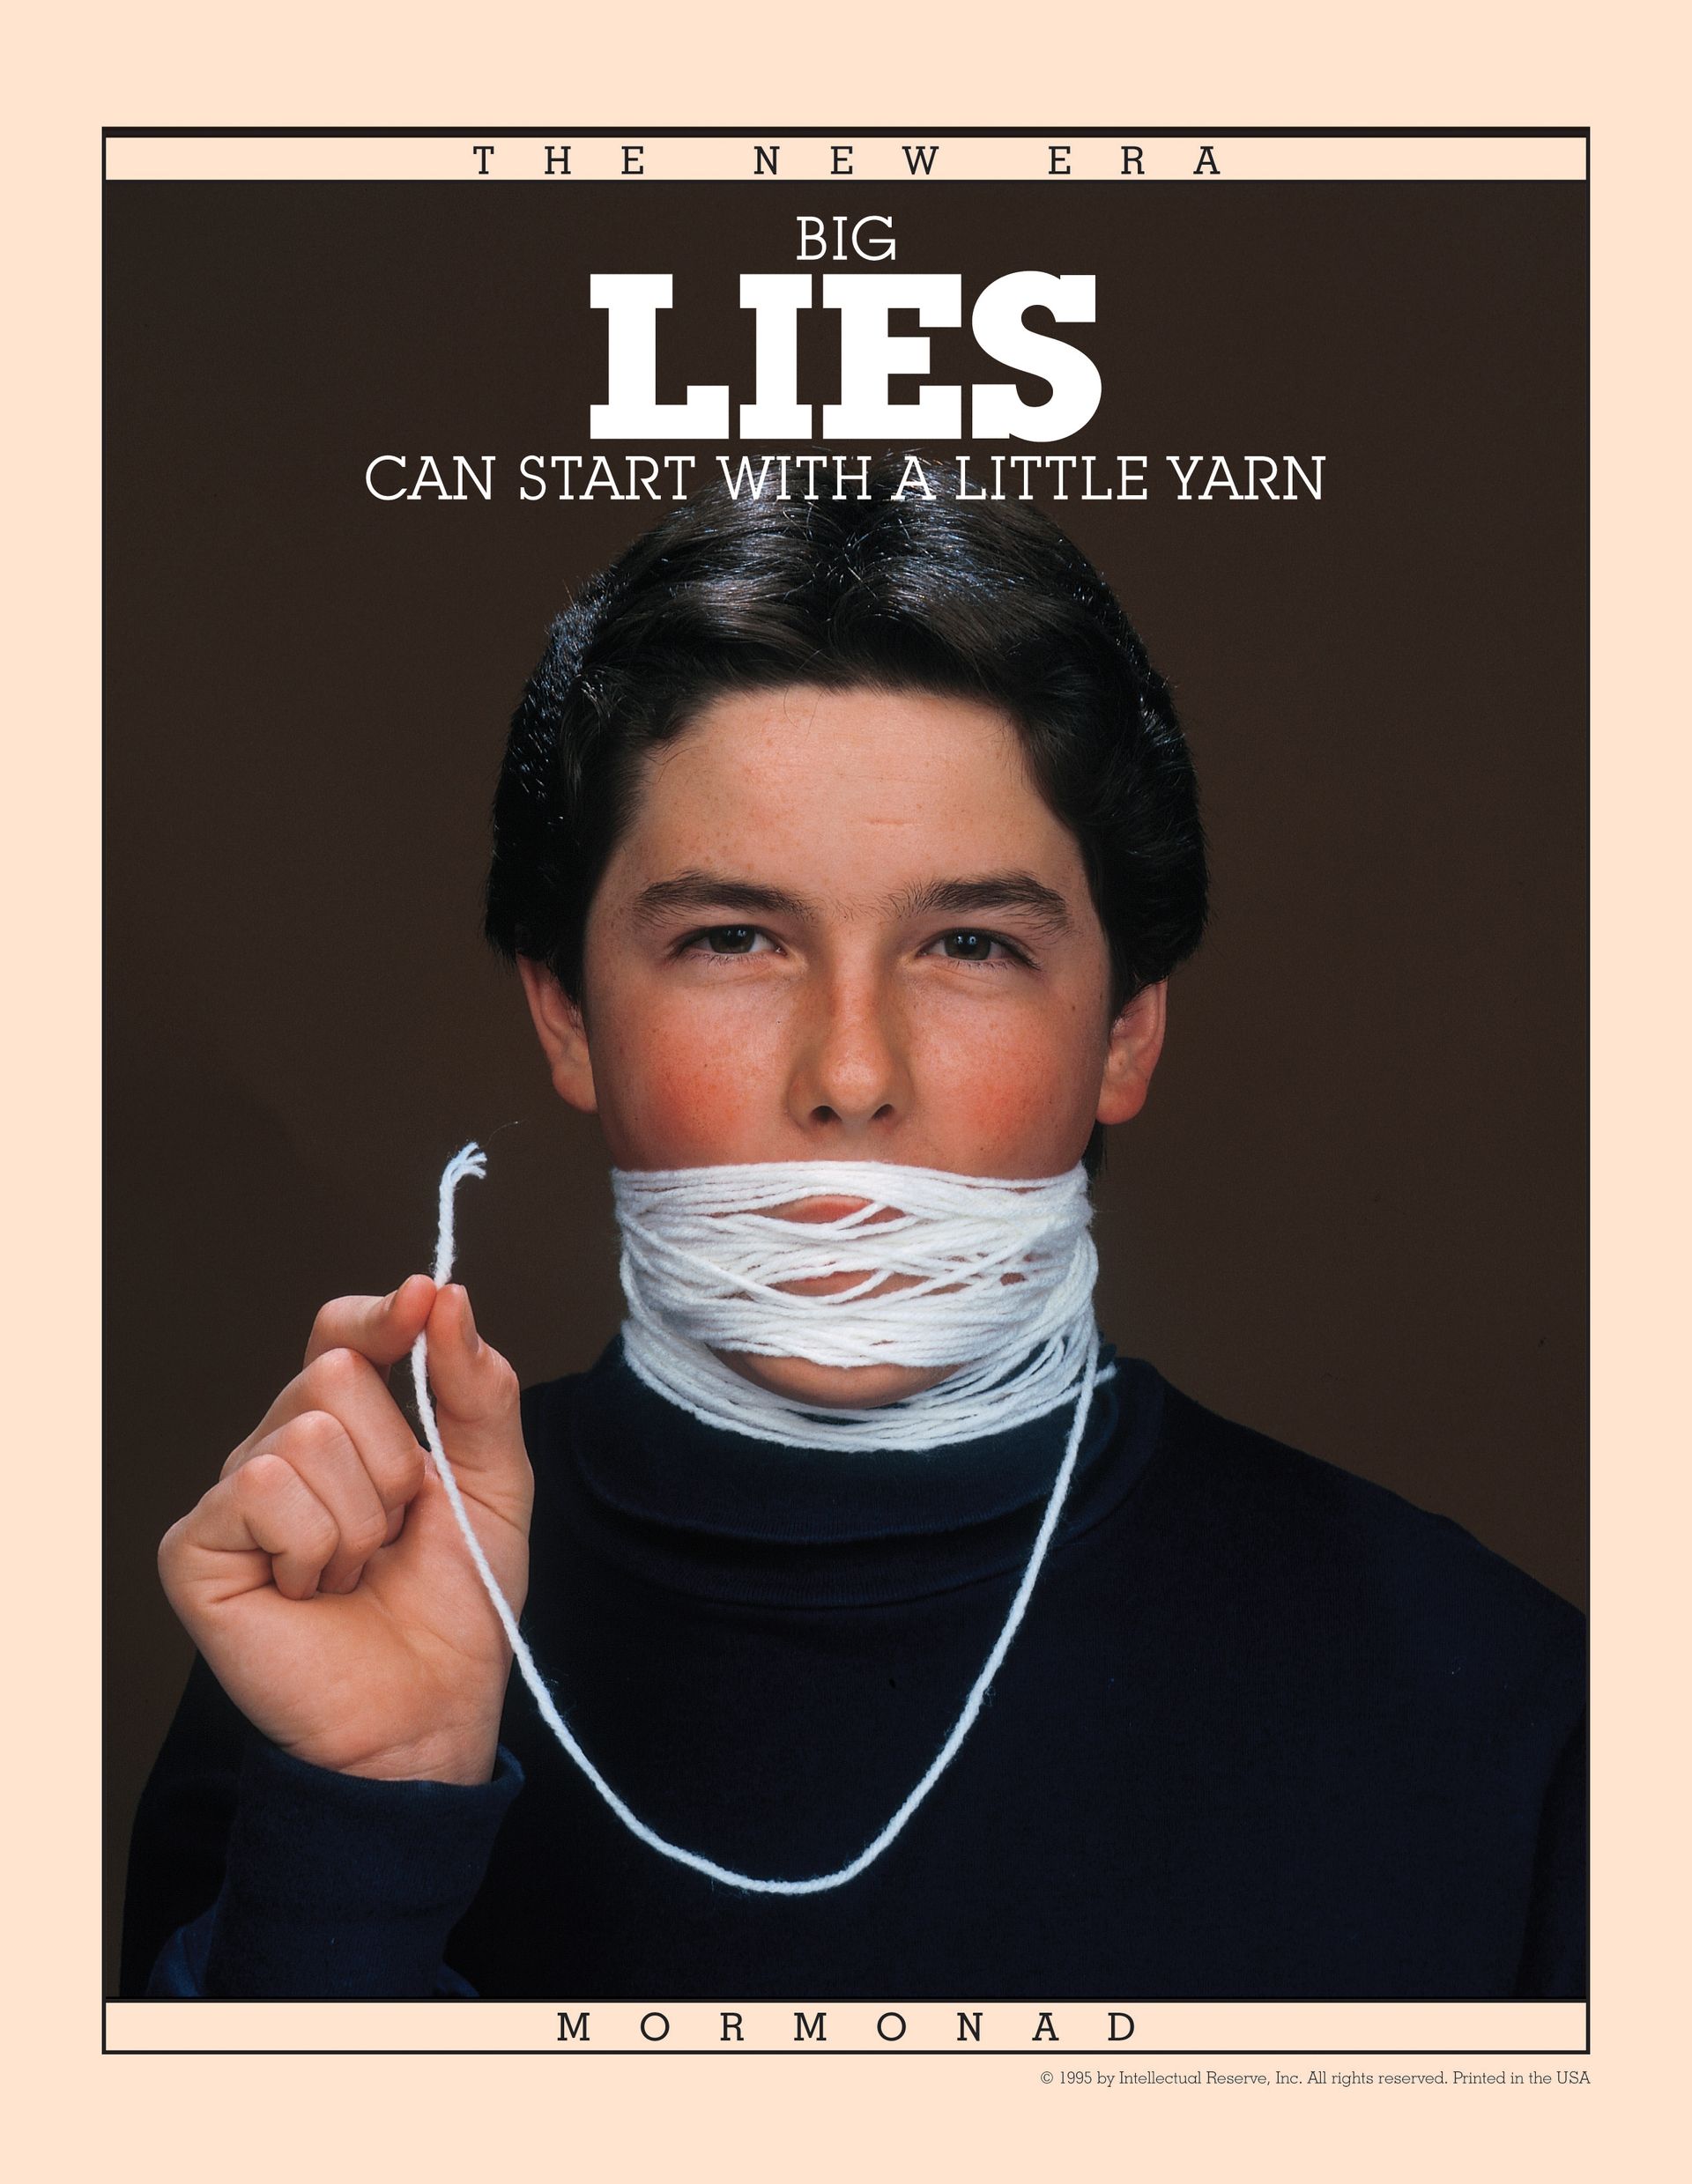 Big Lies Can Start with a Little Yarn. May 1984 © undefined ipCode 1.